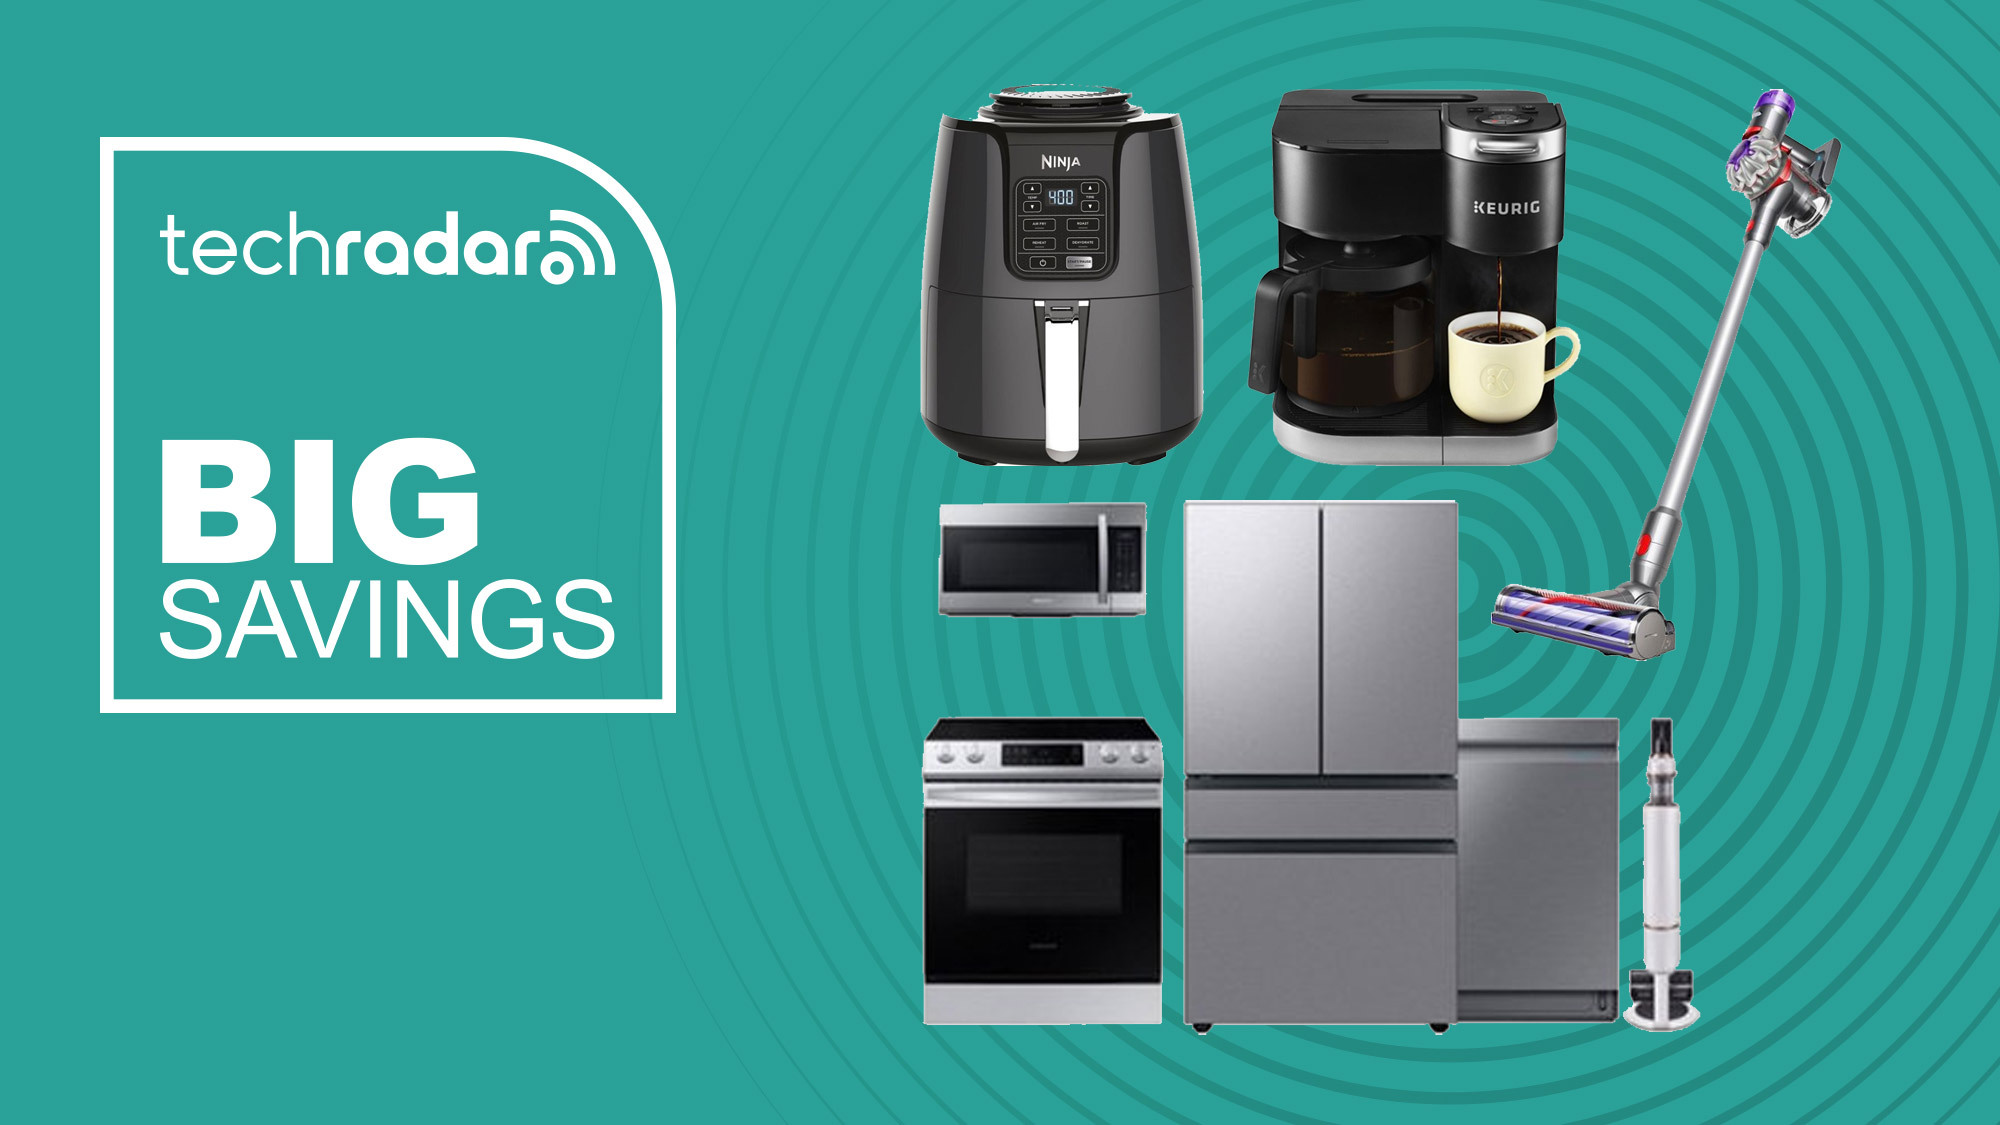 5 Must-Have Small Appliances and Kitchen Gadgets Under 100 dollars